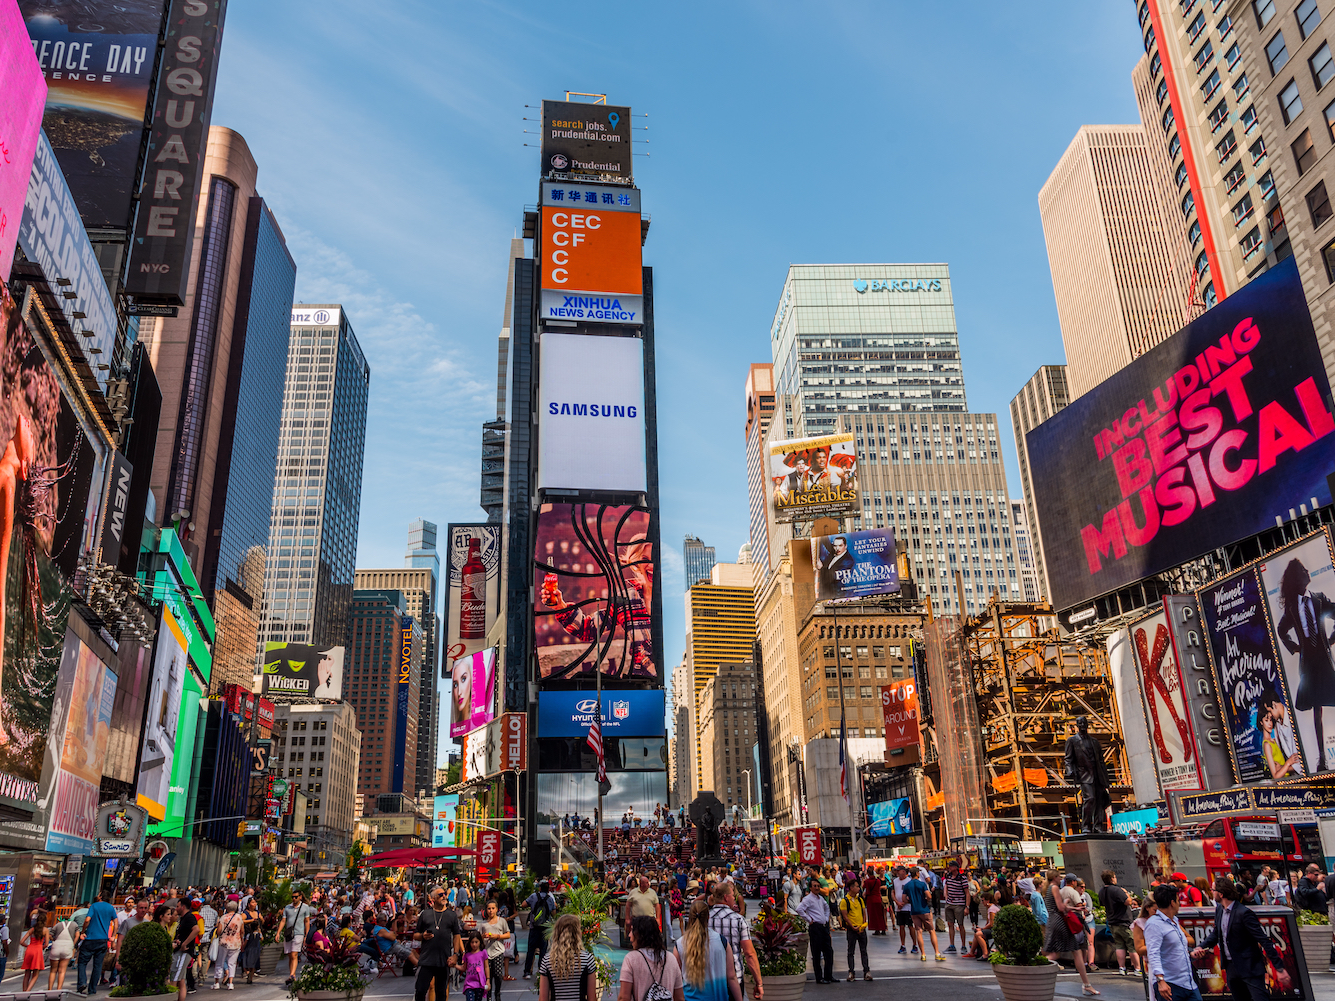 Facts about Times Square in New York City